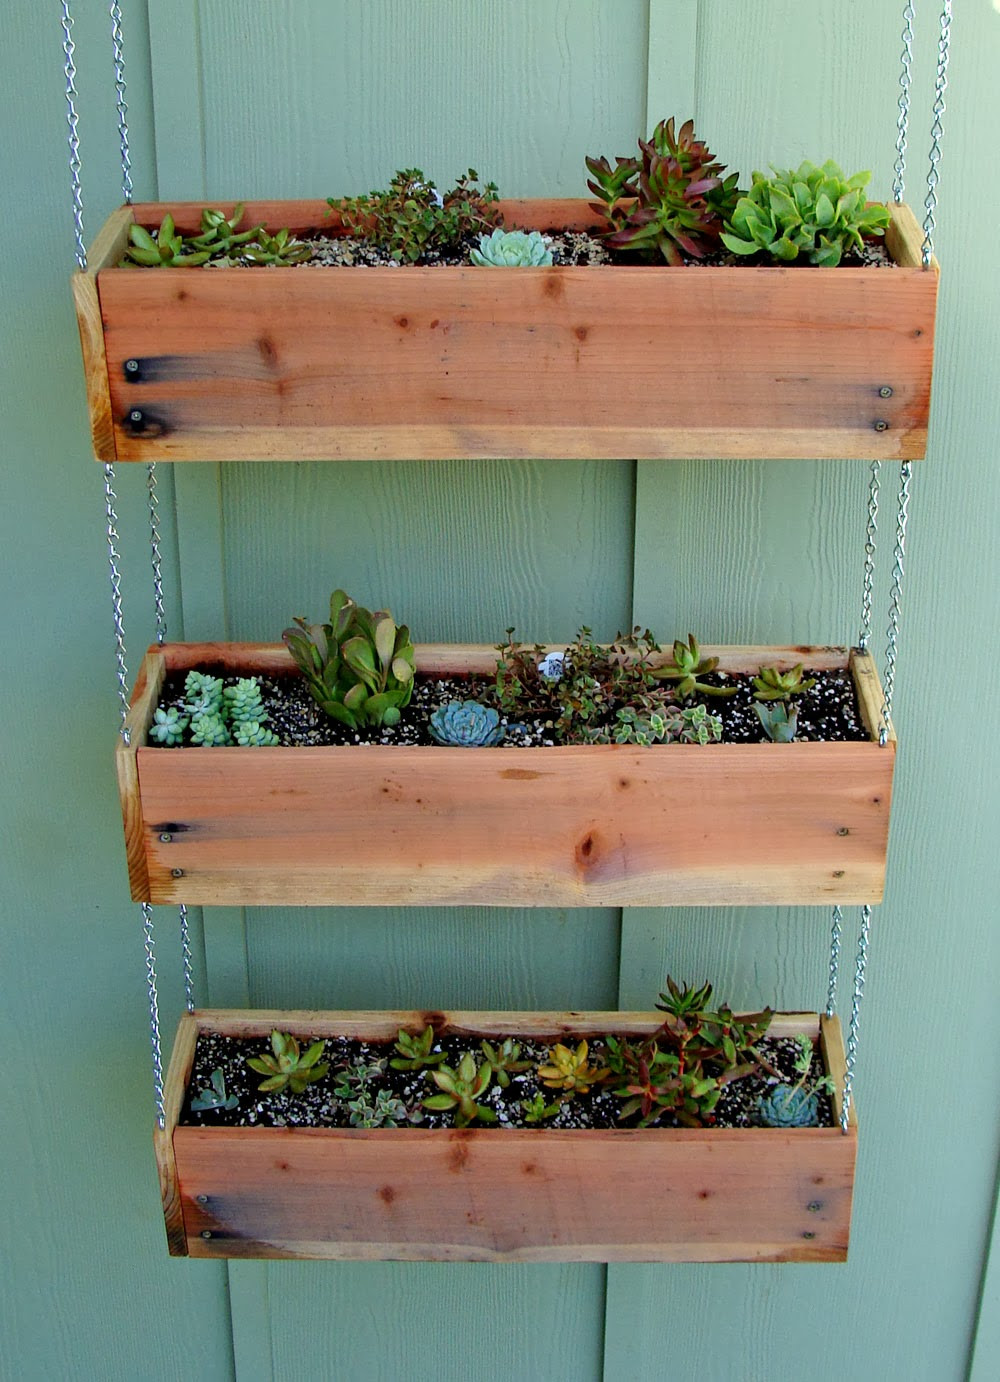 DIY Hanging Planter Box
 37 Outstanding DIY Planter Box Plans Designs and Ideas